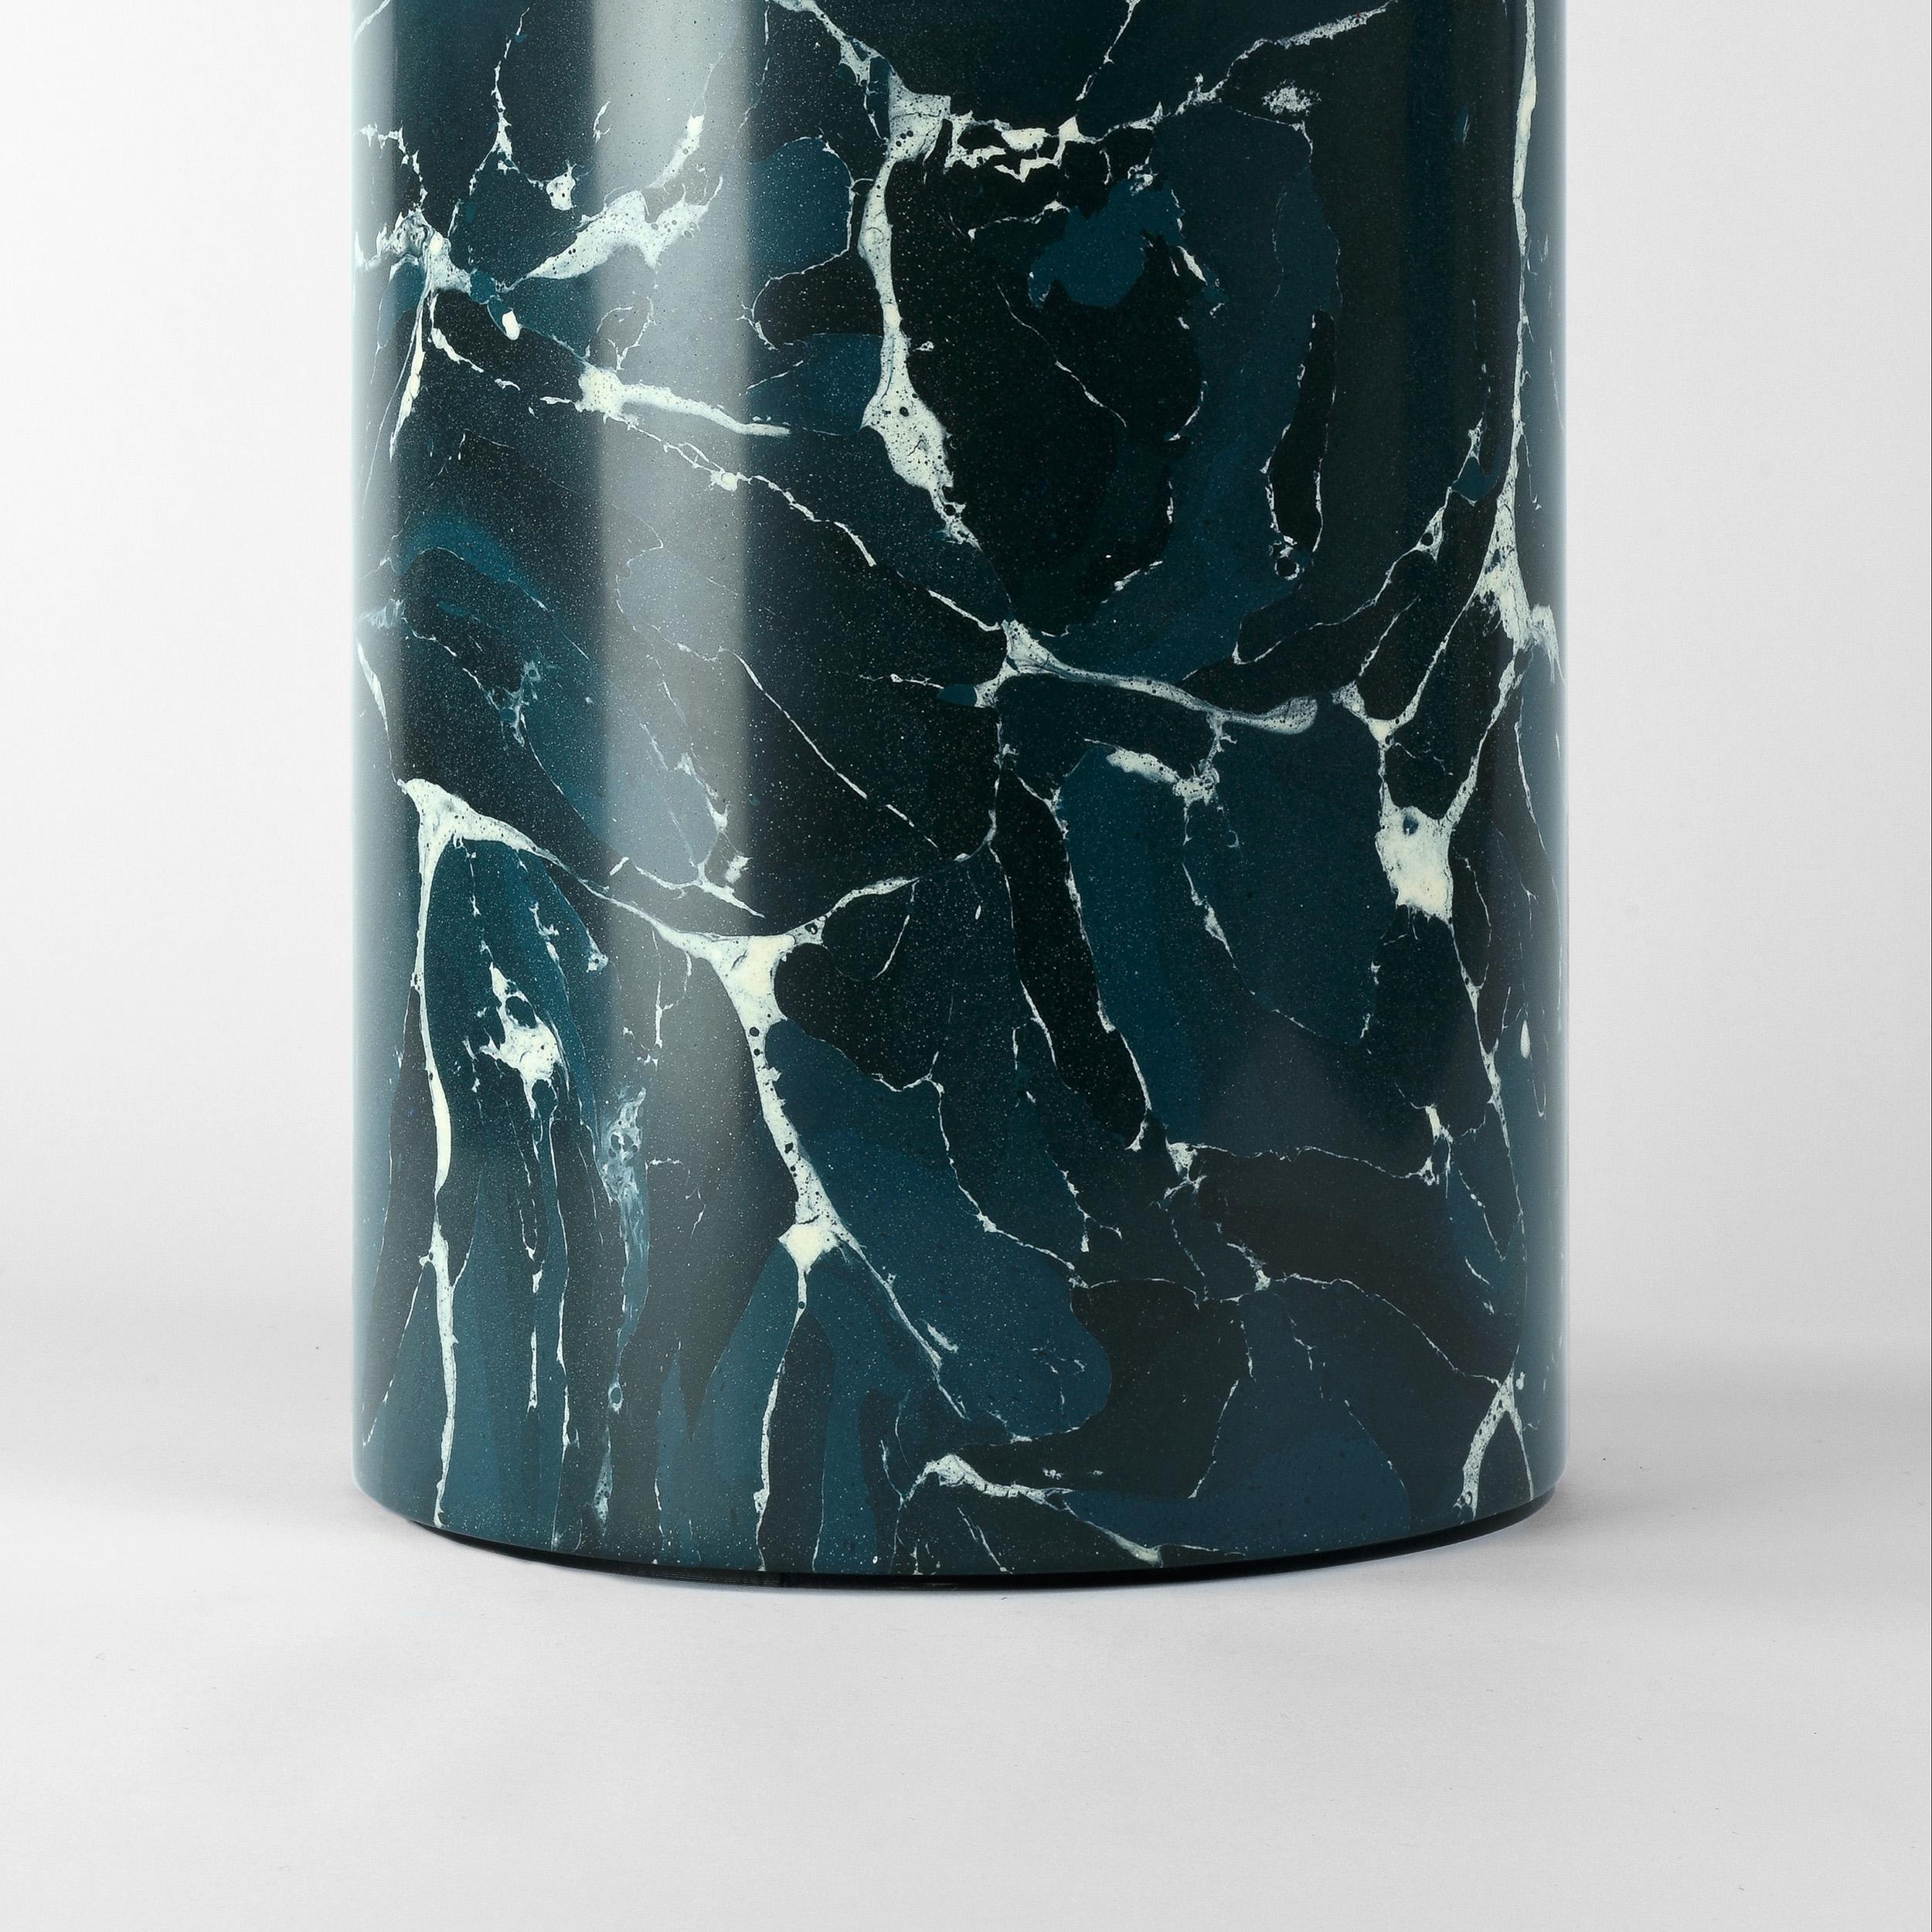 Scagliola table lamp created using shades of deep teal-blue and white veining. 

Crafted using traditional 17th century techniques, each piece is mixed, cast and polished by Christopher in his Worcestershire studio. 

Finished with brass